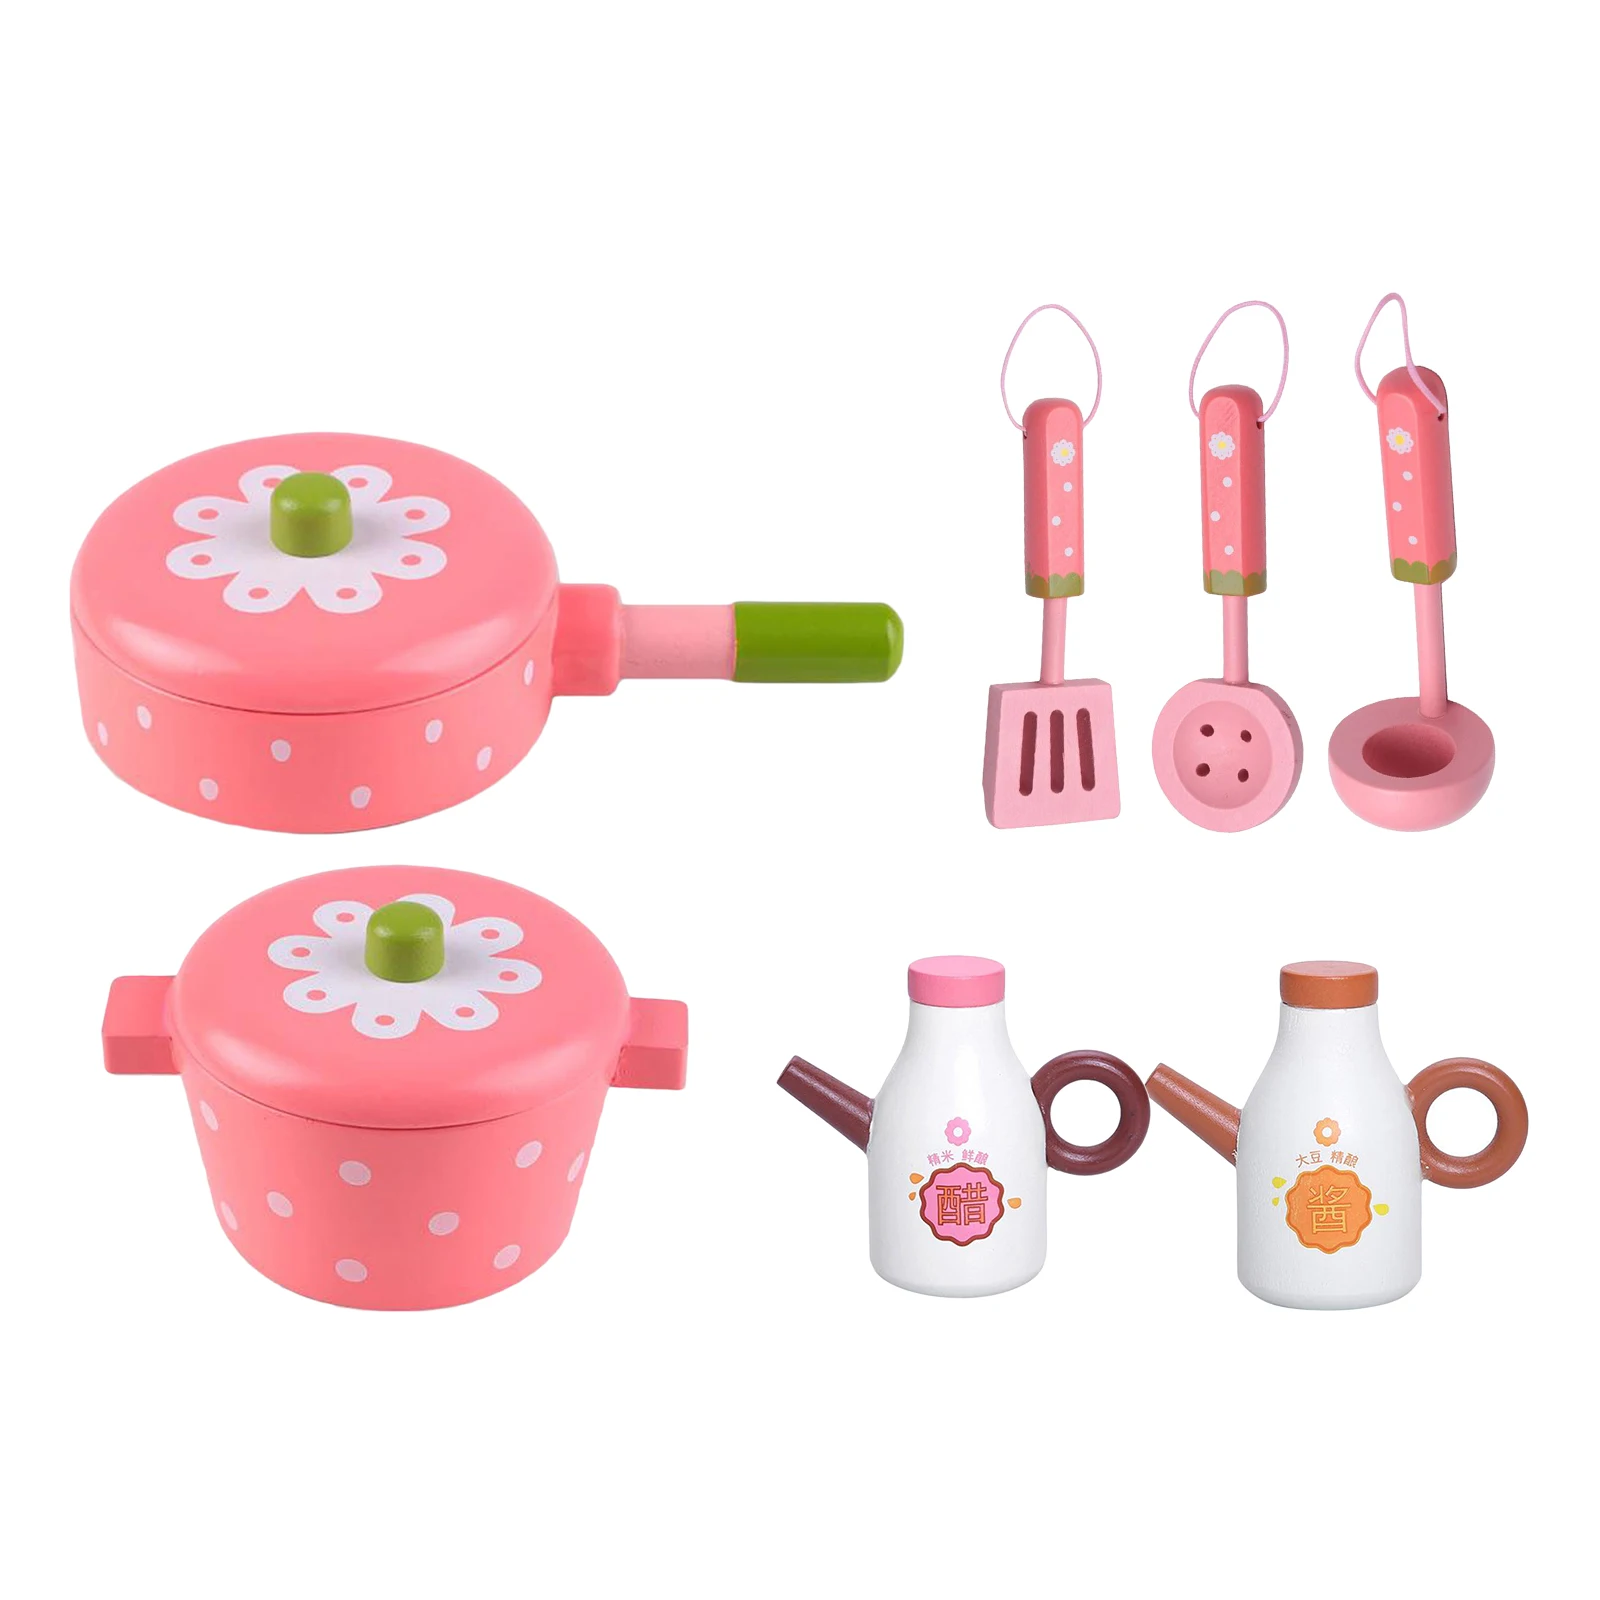 7PCS/Set Mini Kitchen Toys Pretend Cooking Pink Wooden Cookware Pot Pan Miniature Utensils Role Playing Learning Kitchen Toy